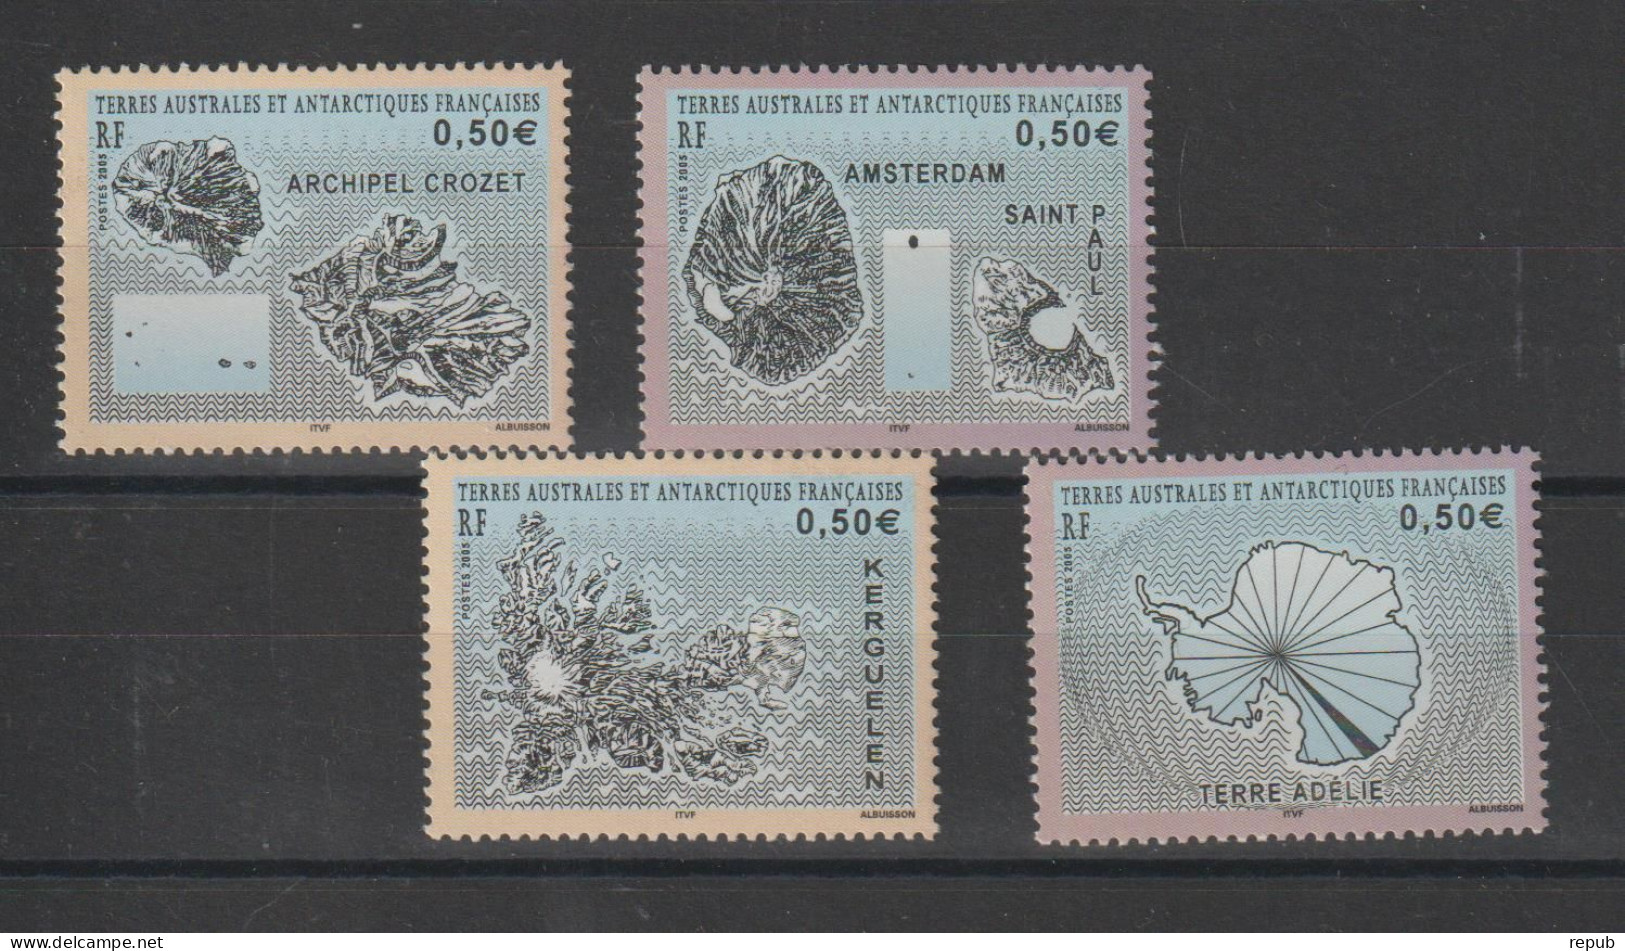 TAAF 2005 Timbres Issus Du BF 13, 431-434, 4 Val ** MNH - Unused Stamps